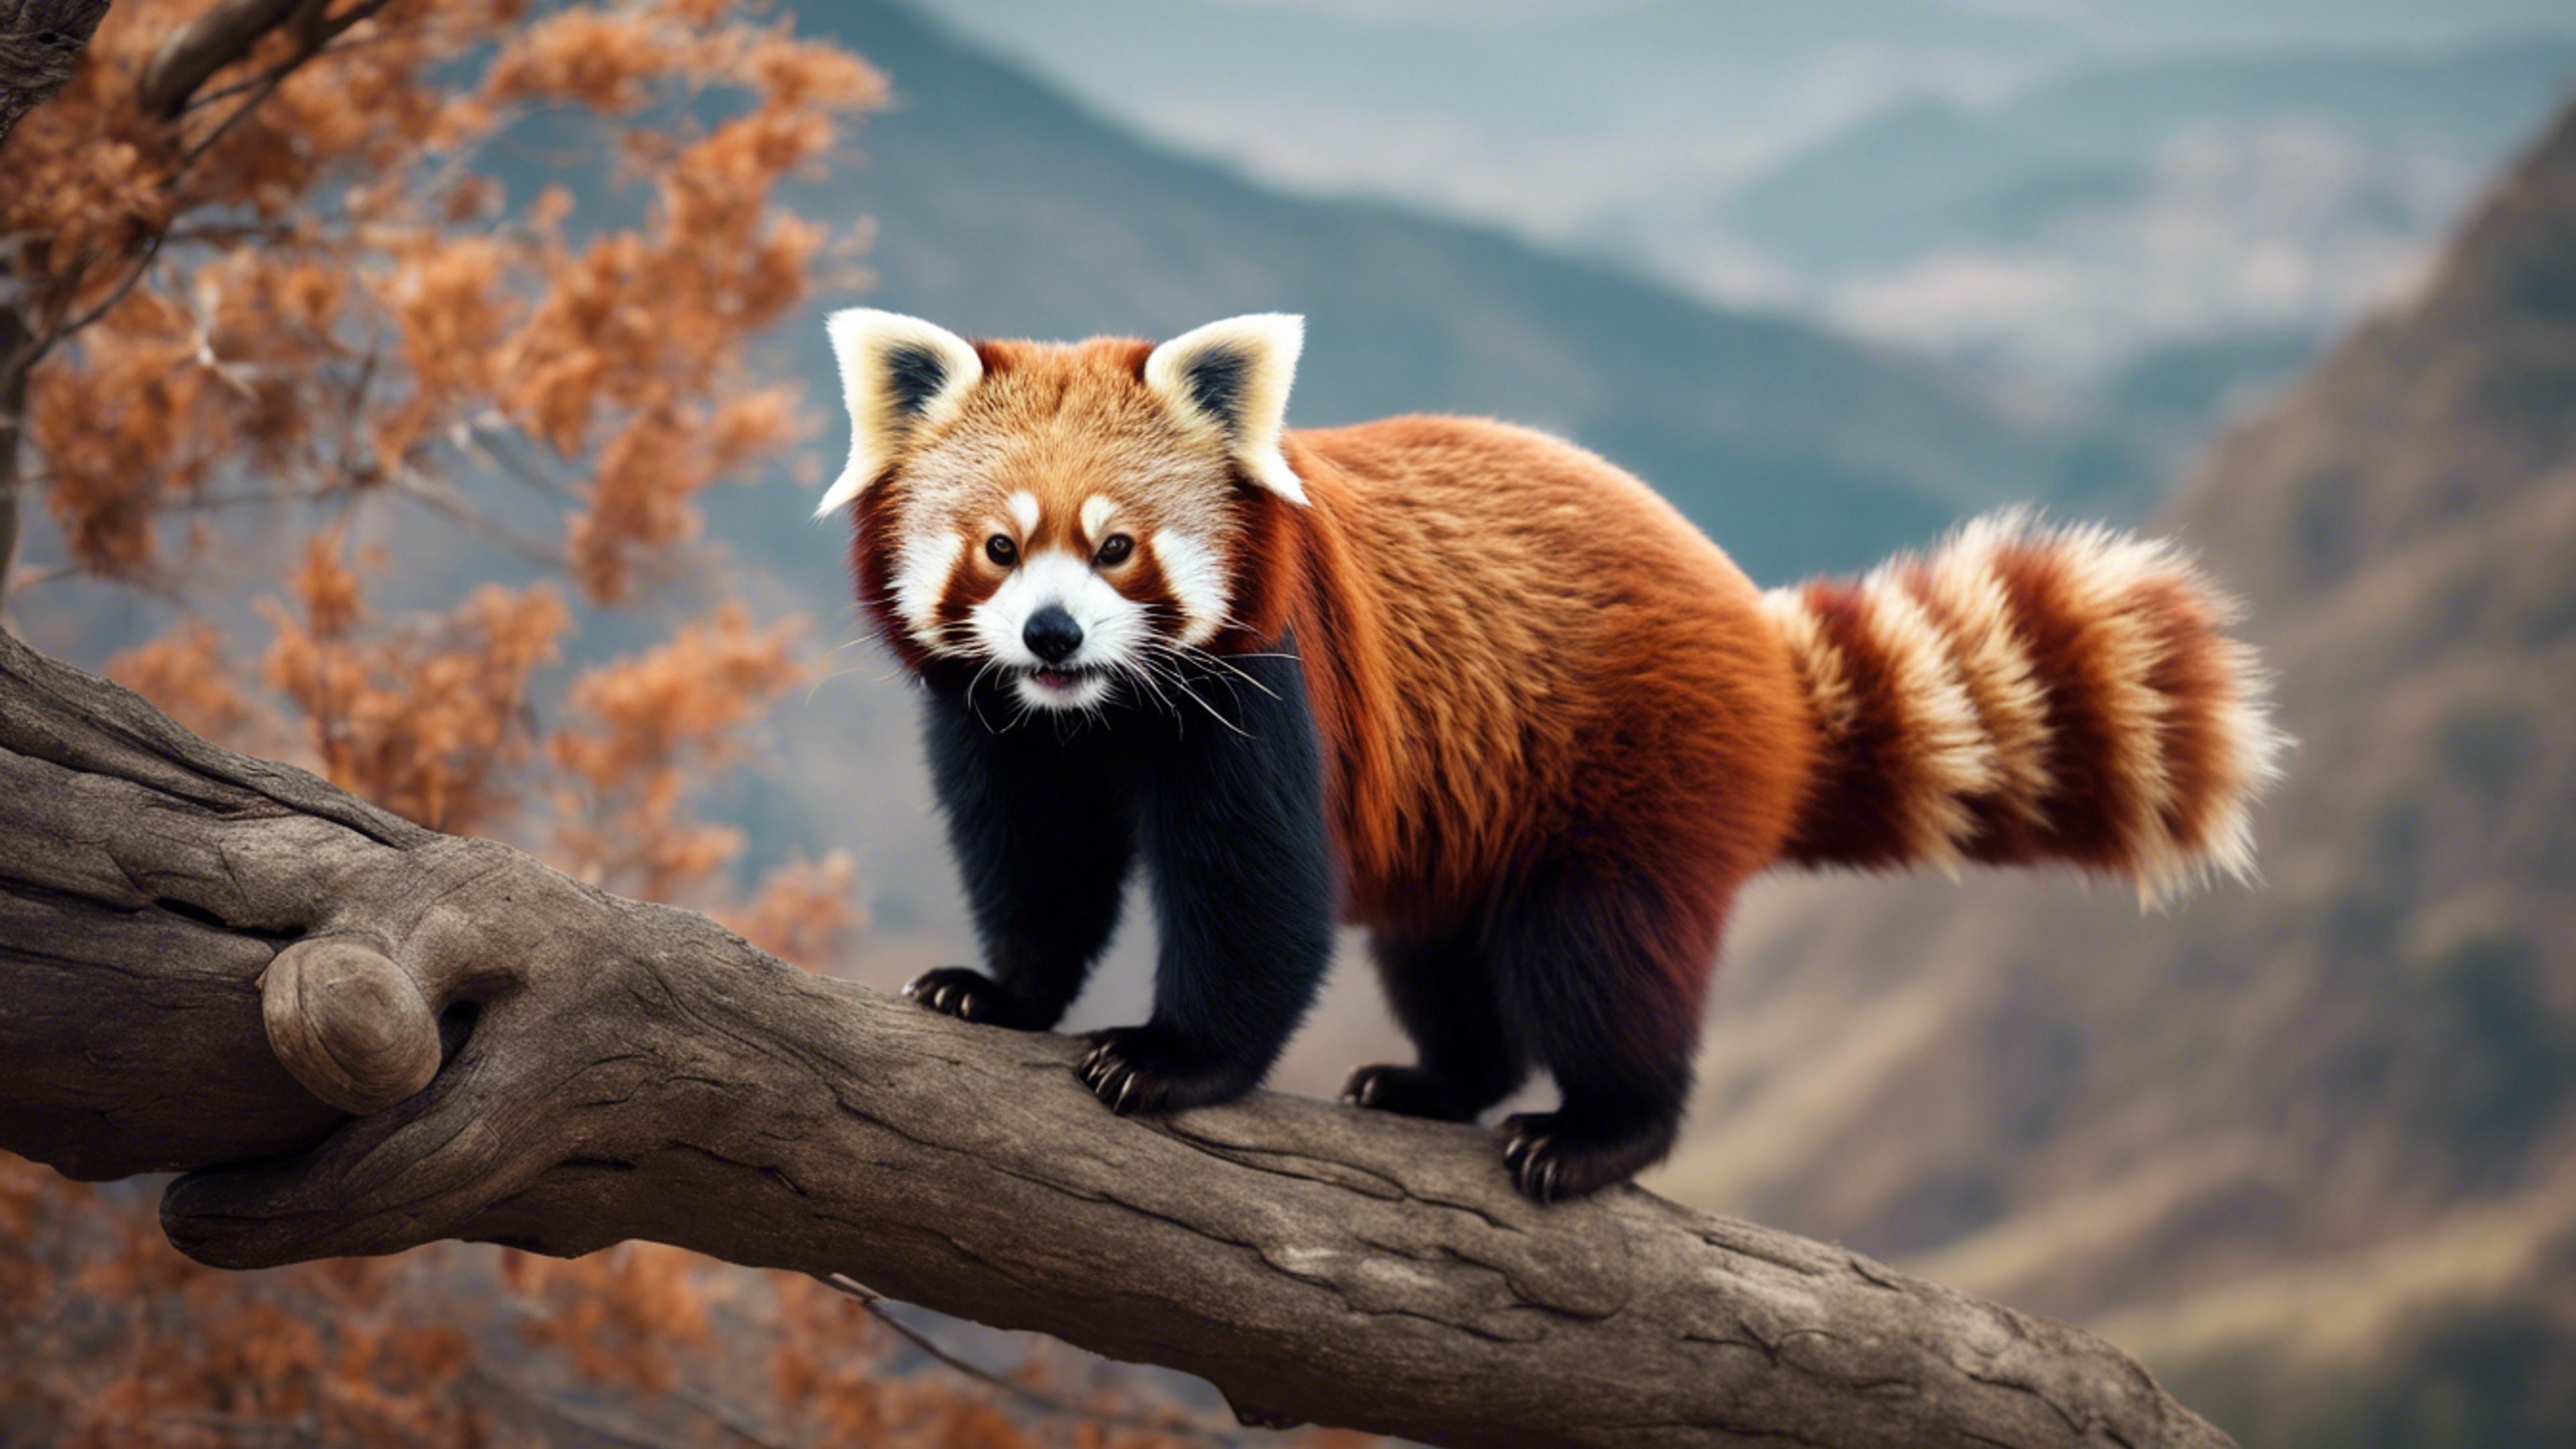 A strong, adult red panda confidently standing on a branch, mountains in the backdrop. Tapeta[4b97538c6e5a45e29bab]